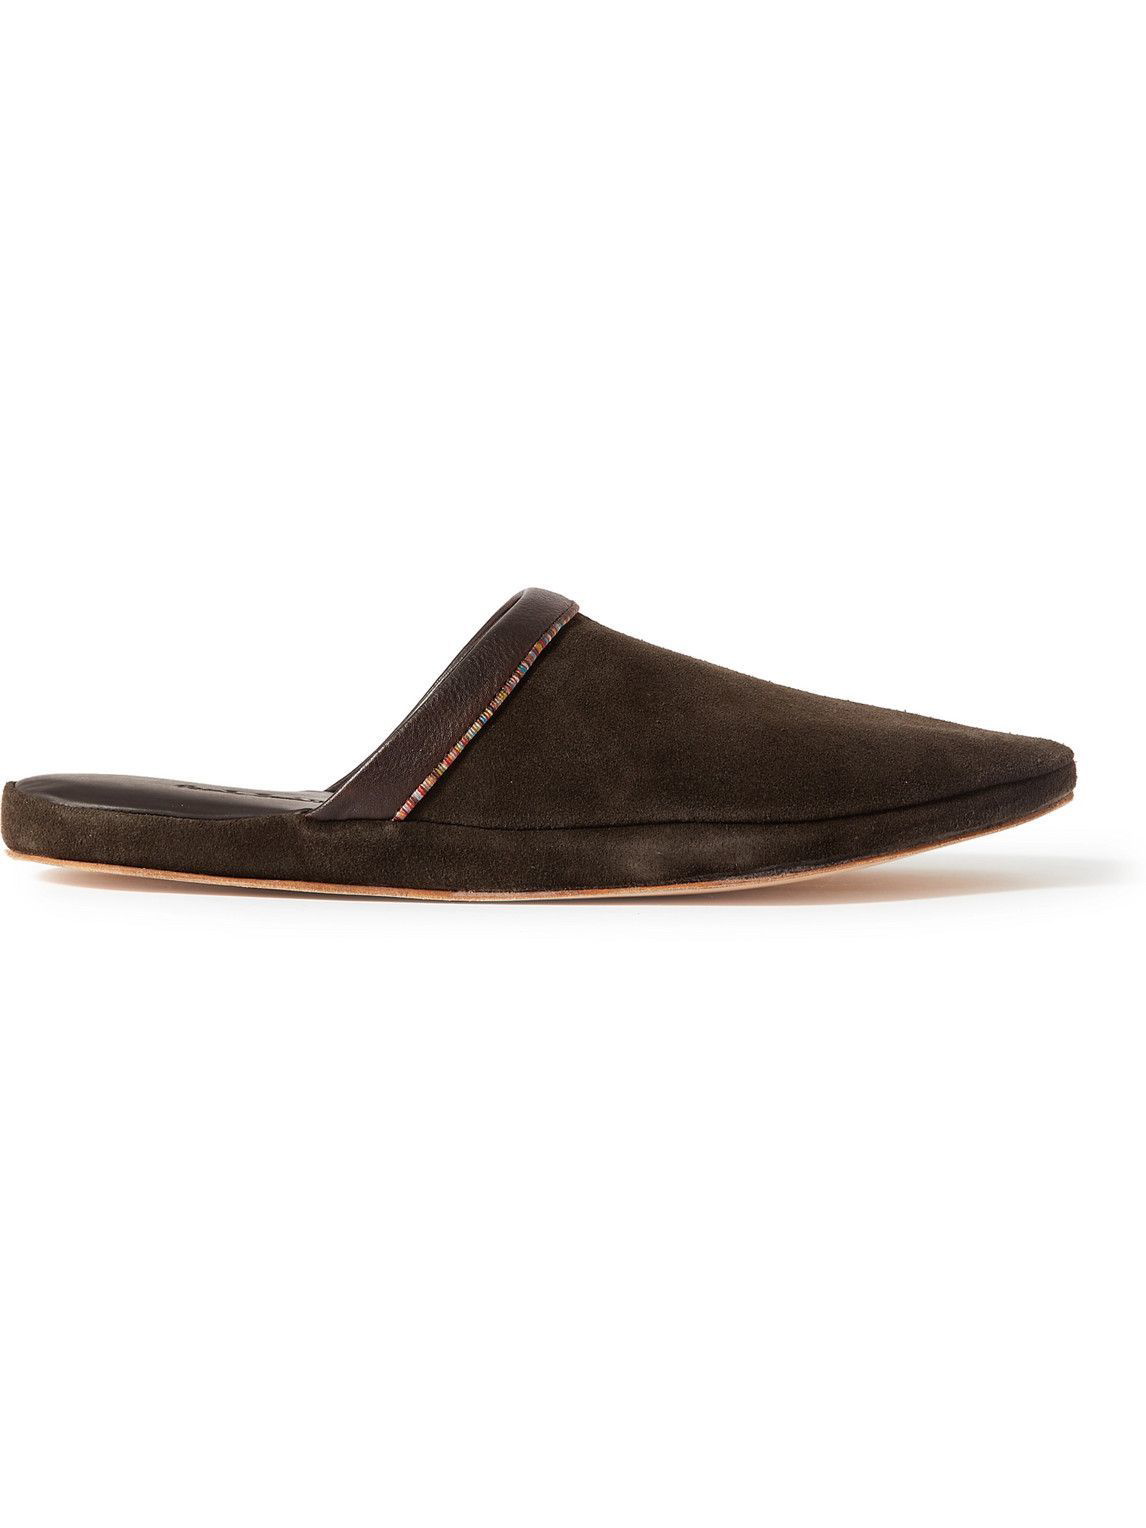 Paul Smith - Striped Leather-Trimmed Slippers - Brown Paul Smith